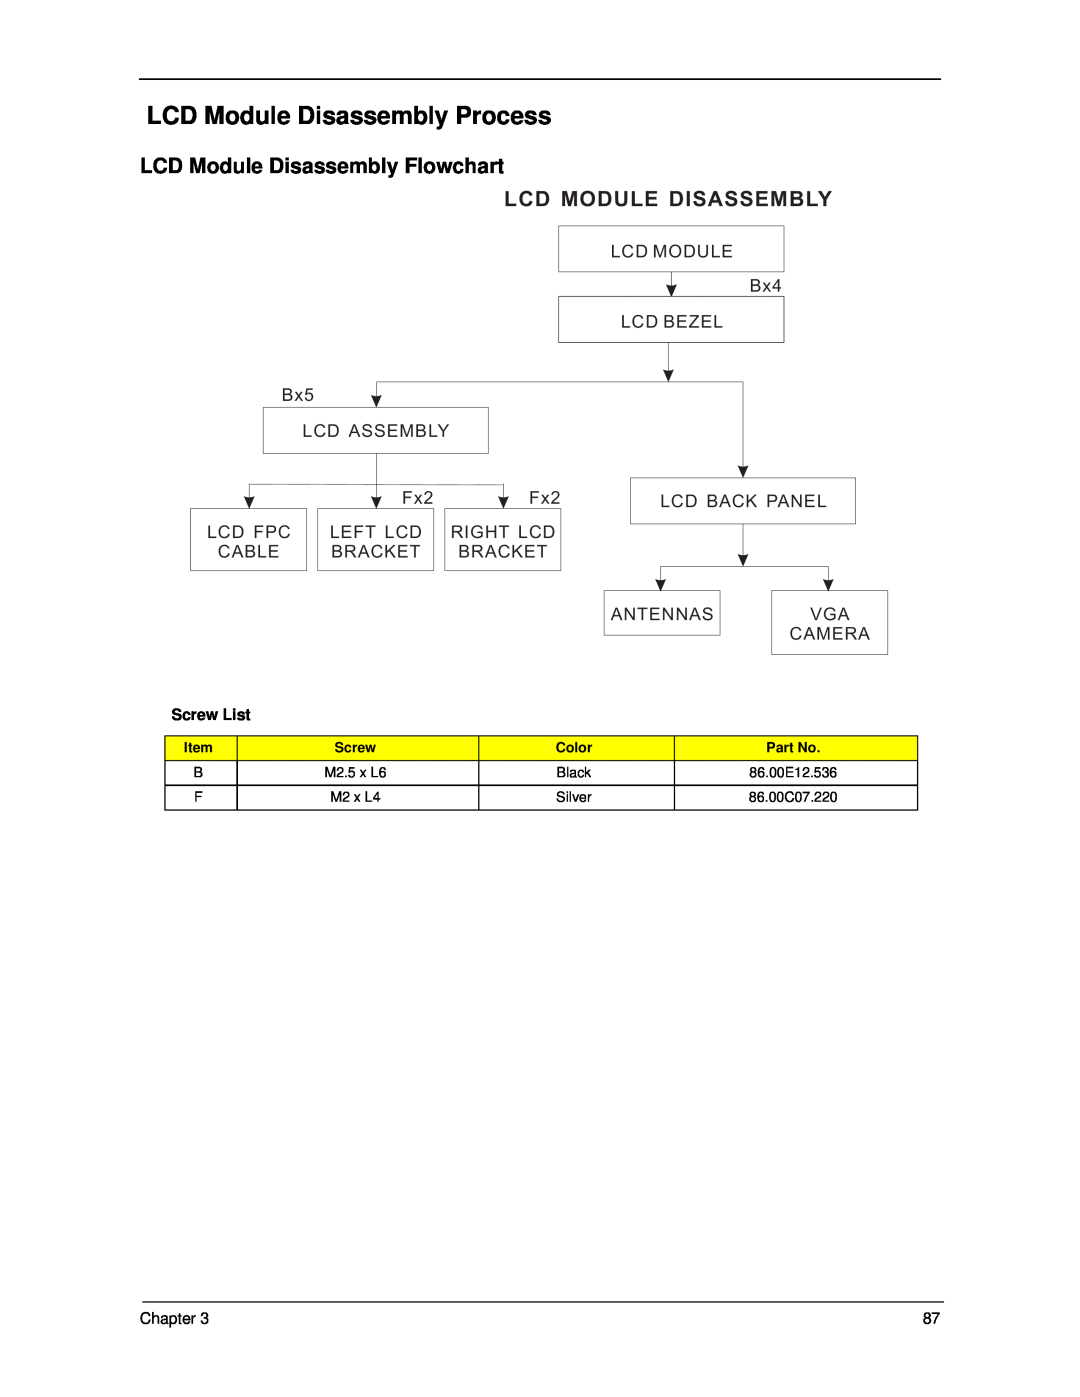 Acer 5330 LCD Module Disassembly Process, LCD Module Disassembly Flowchart, Lcd Module Disassembly, Screw List, Color 